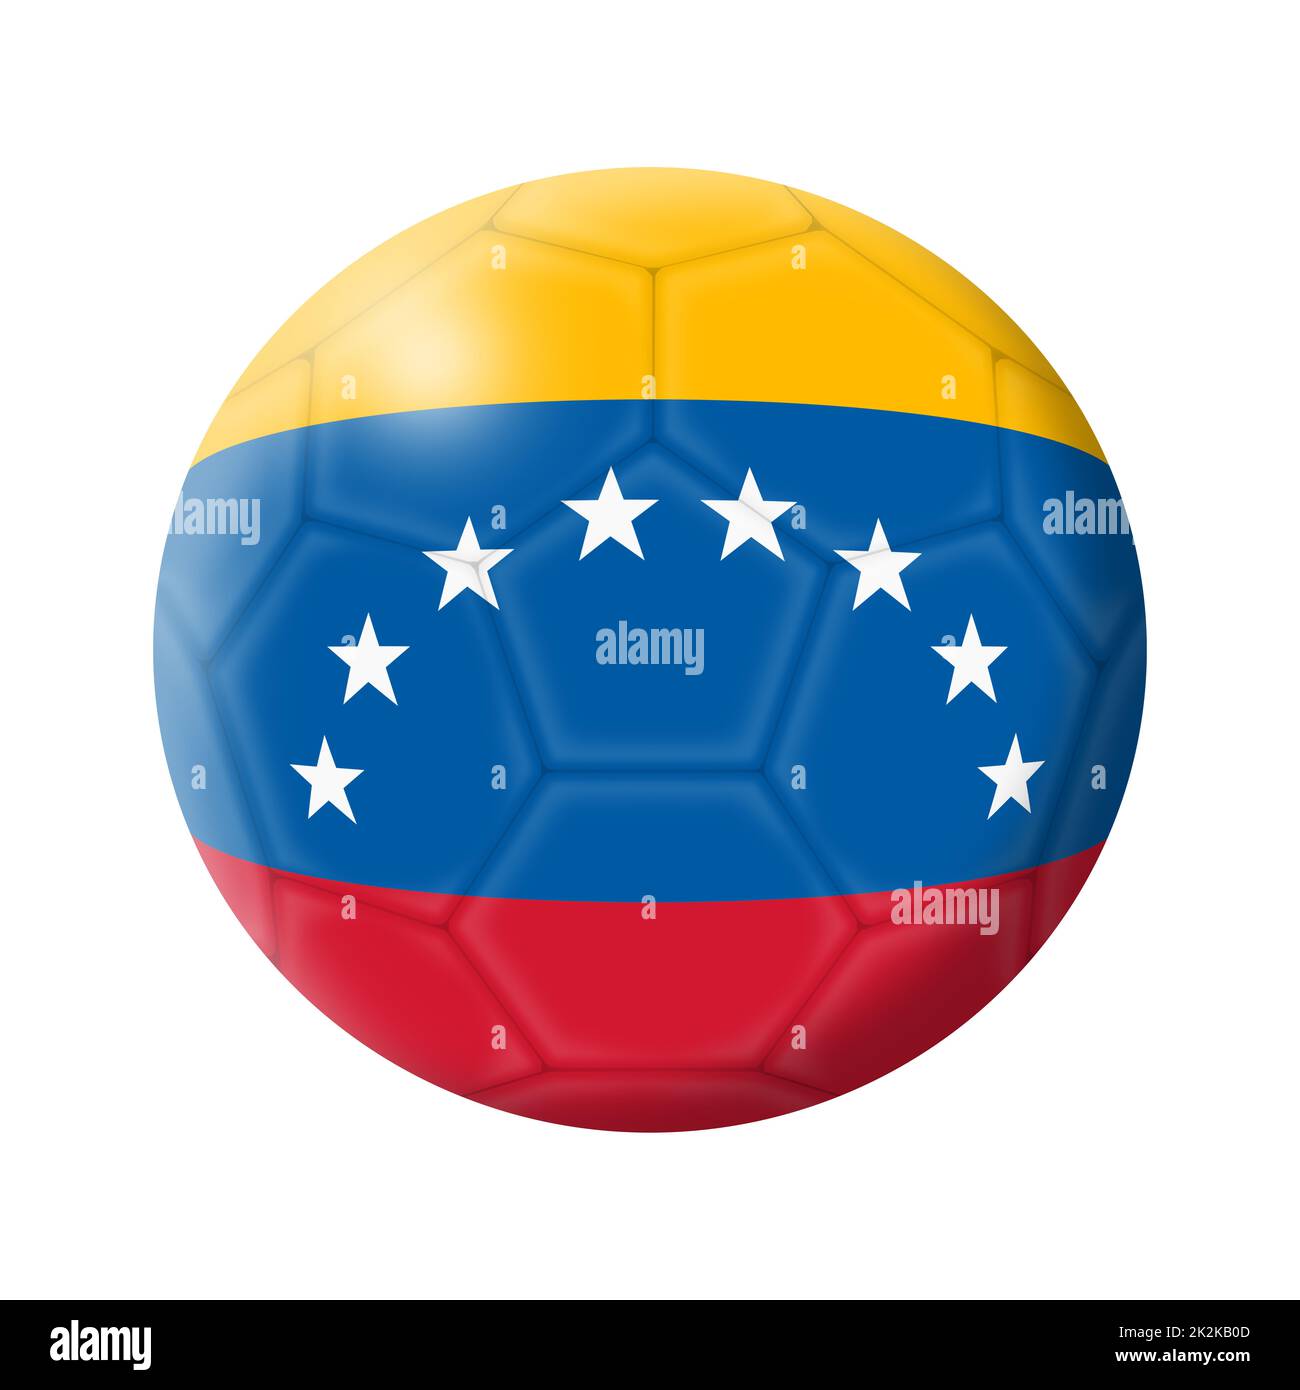 Venezuela soccer ball football 3d illustration isolated on white with clipping path Stock Photo